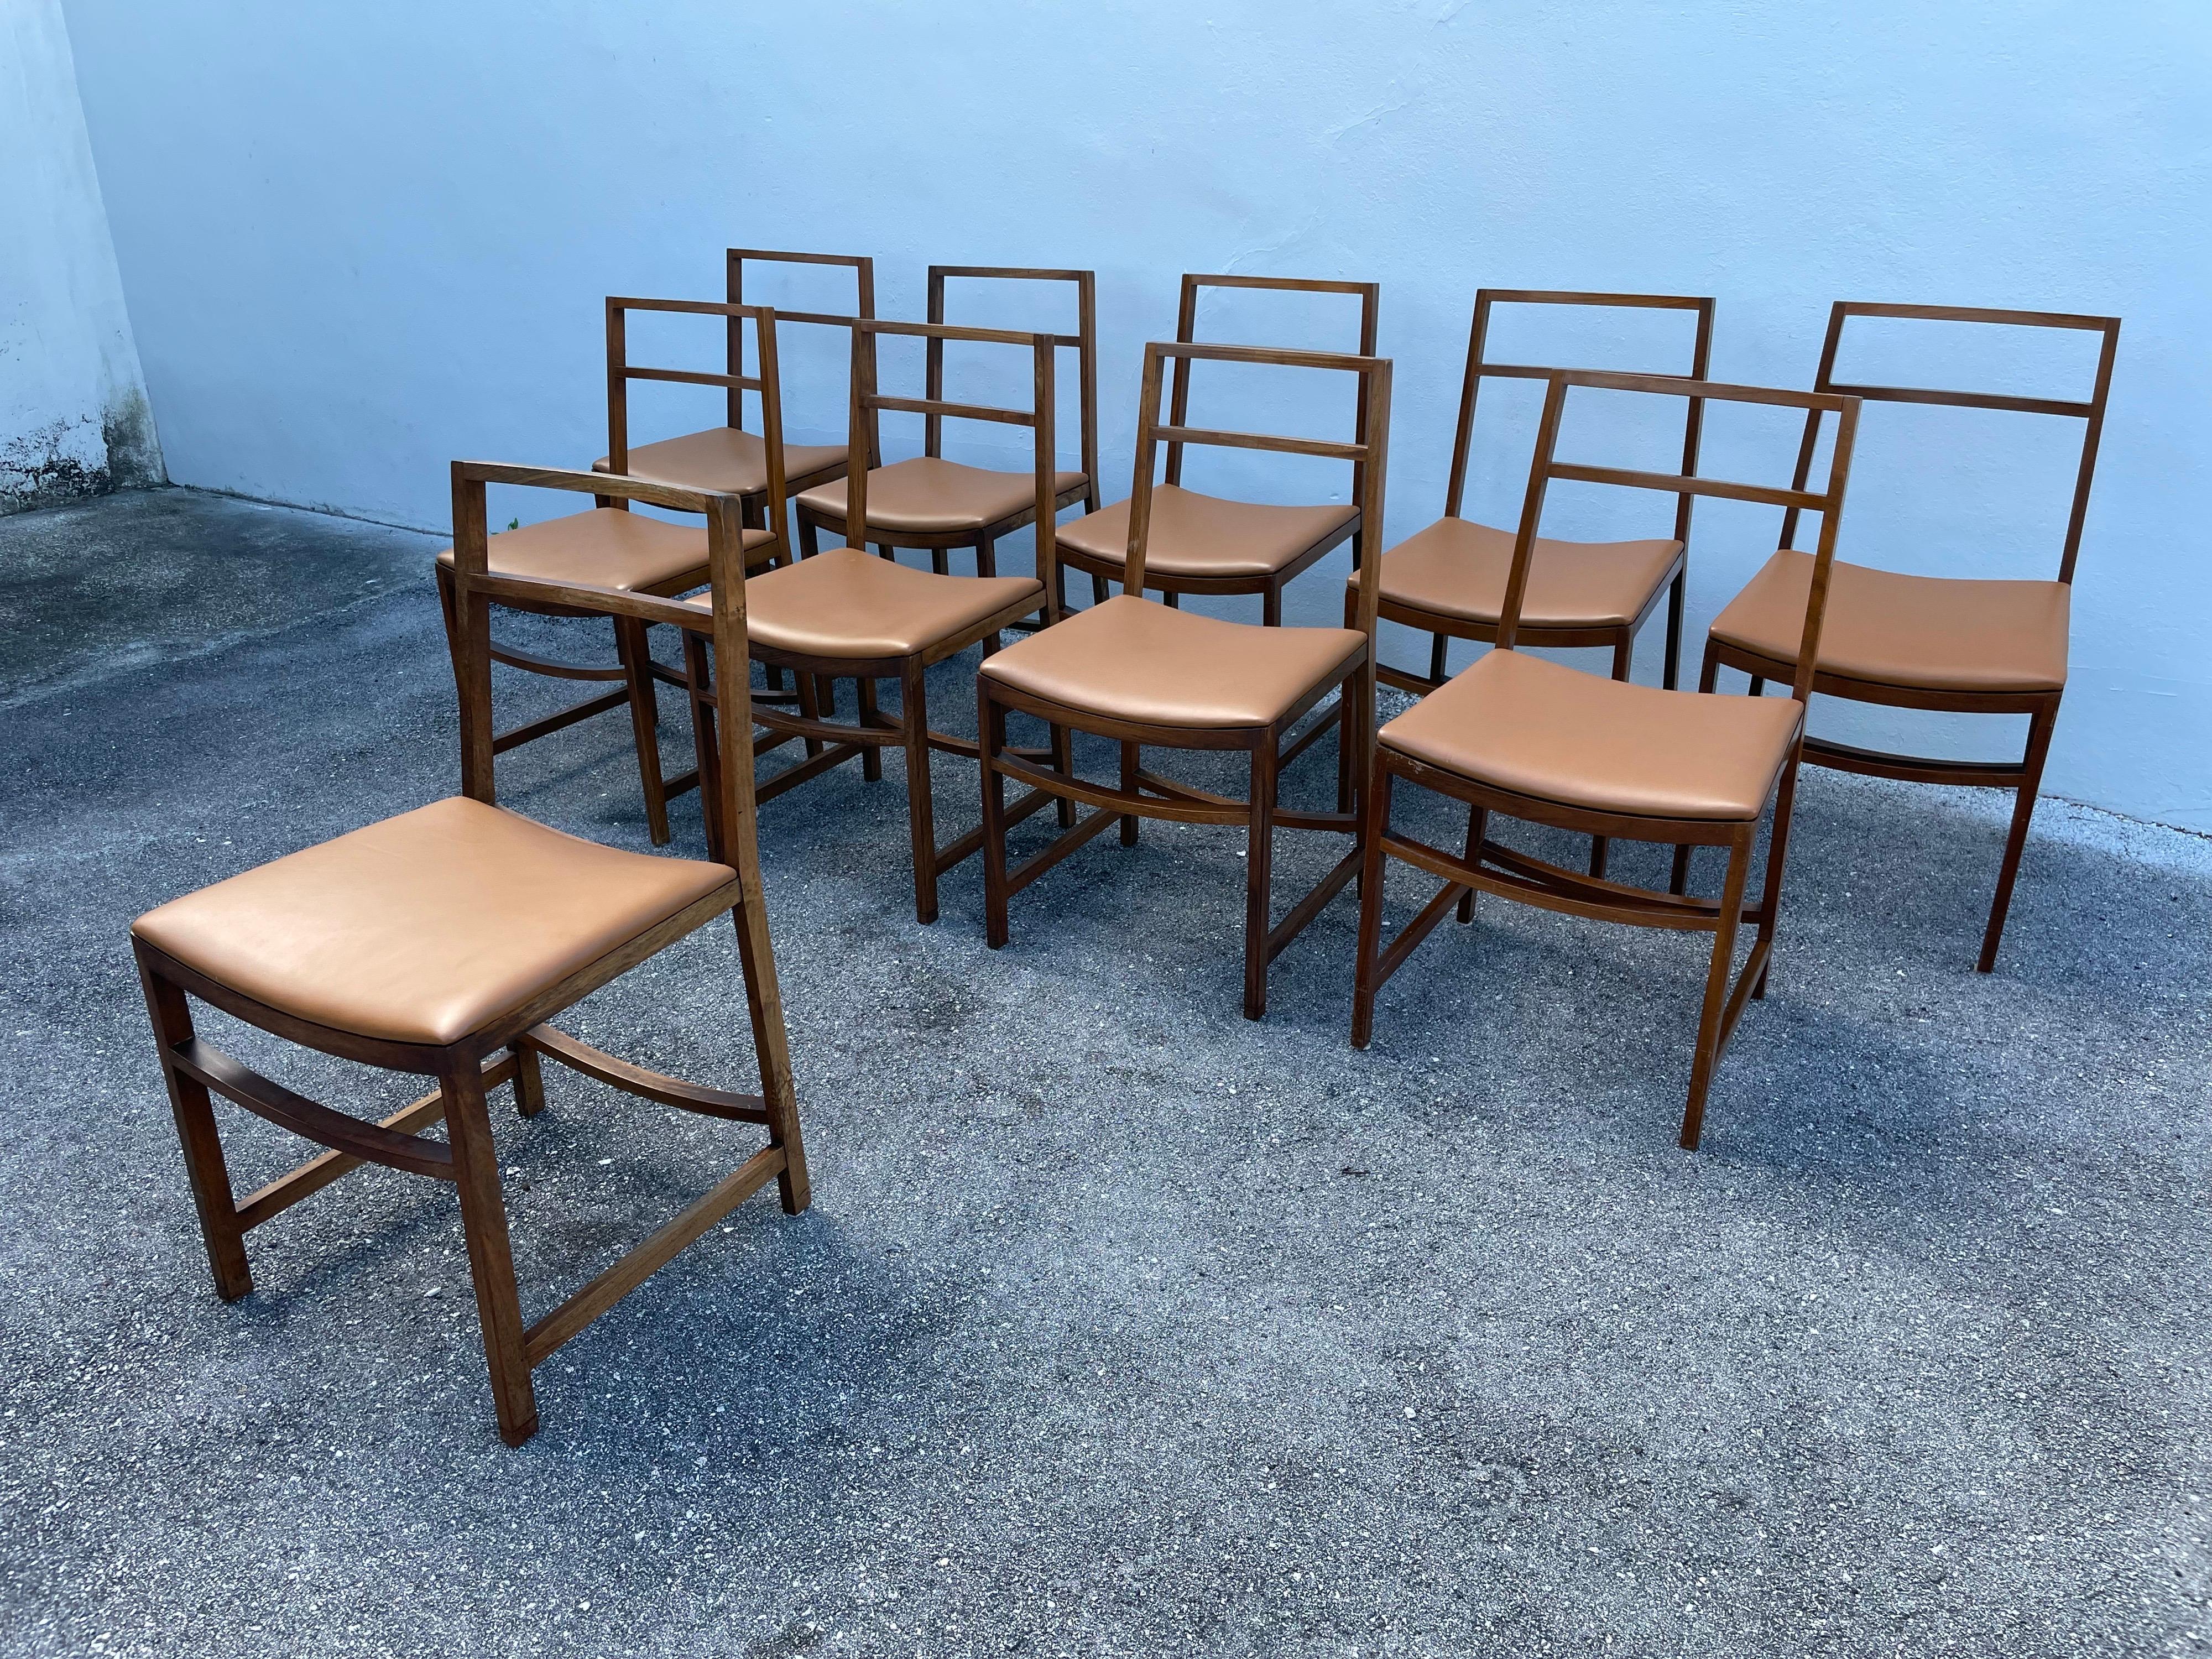 A superb rare set of TEN Rosewood dining chairs by Renato Venturi for MiM Roma (Mobili Italiani Moderni). These sturdy rosewood chairs designed by Renato Venturi with an architectural flair - original leatherette seats. Published in Domus 402 (may